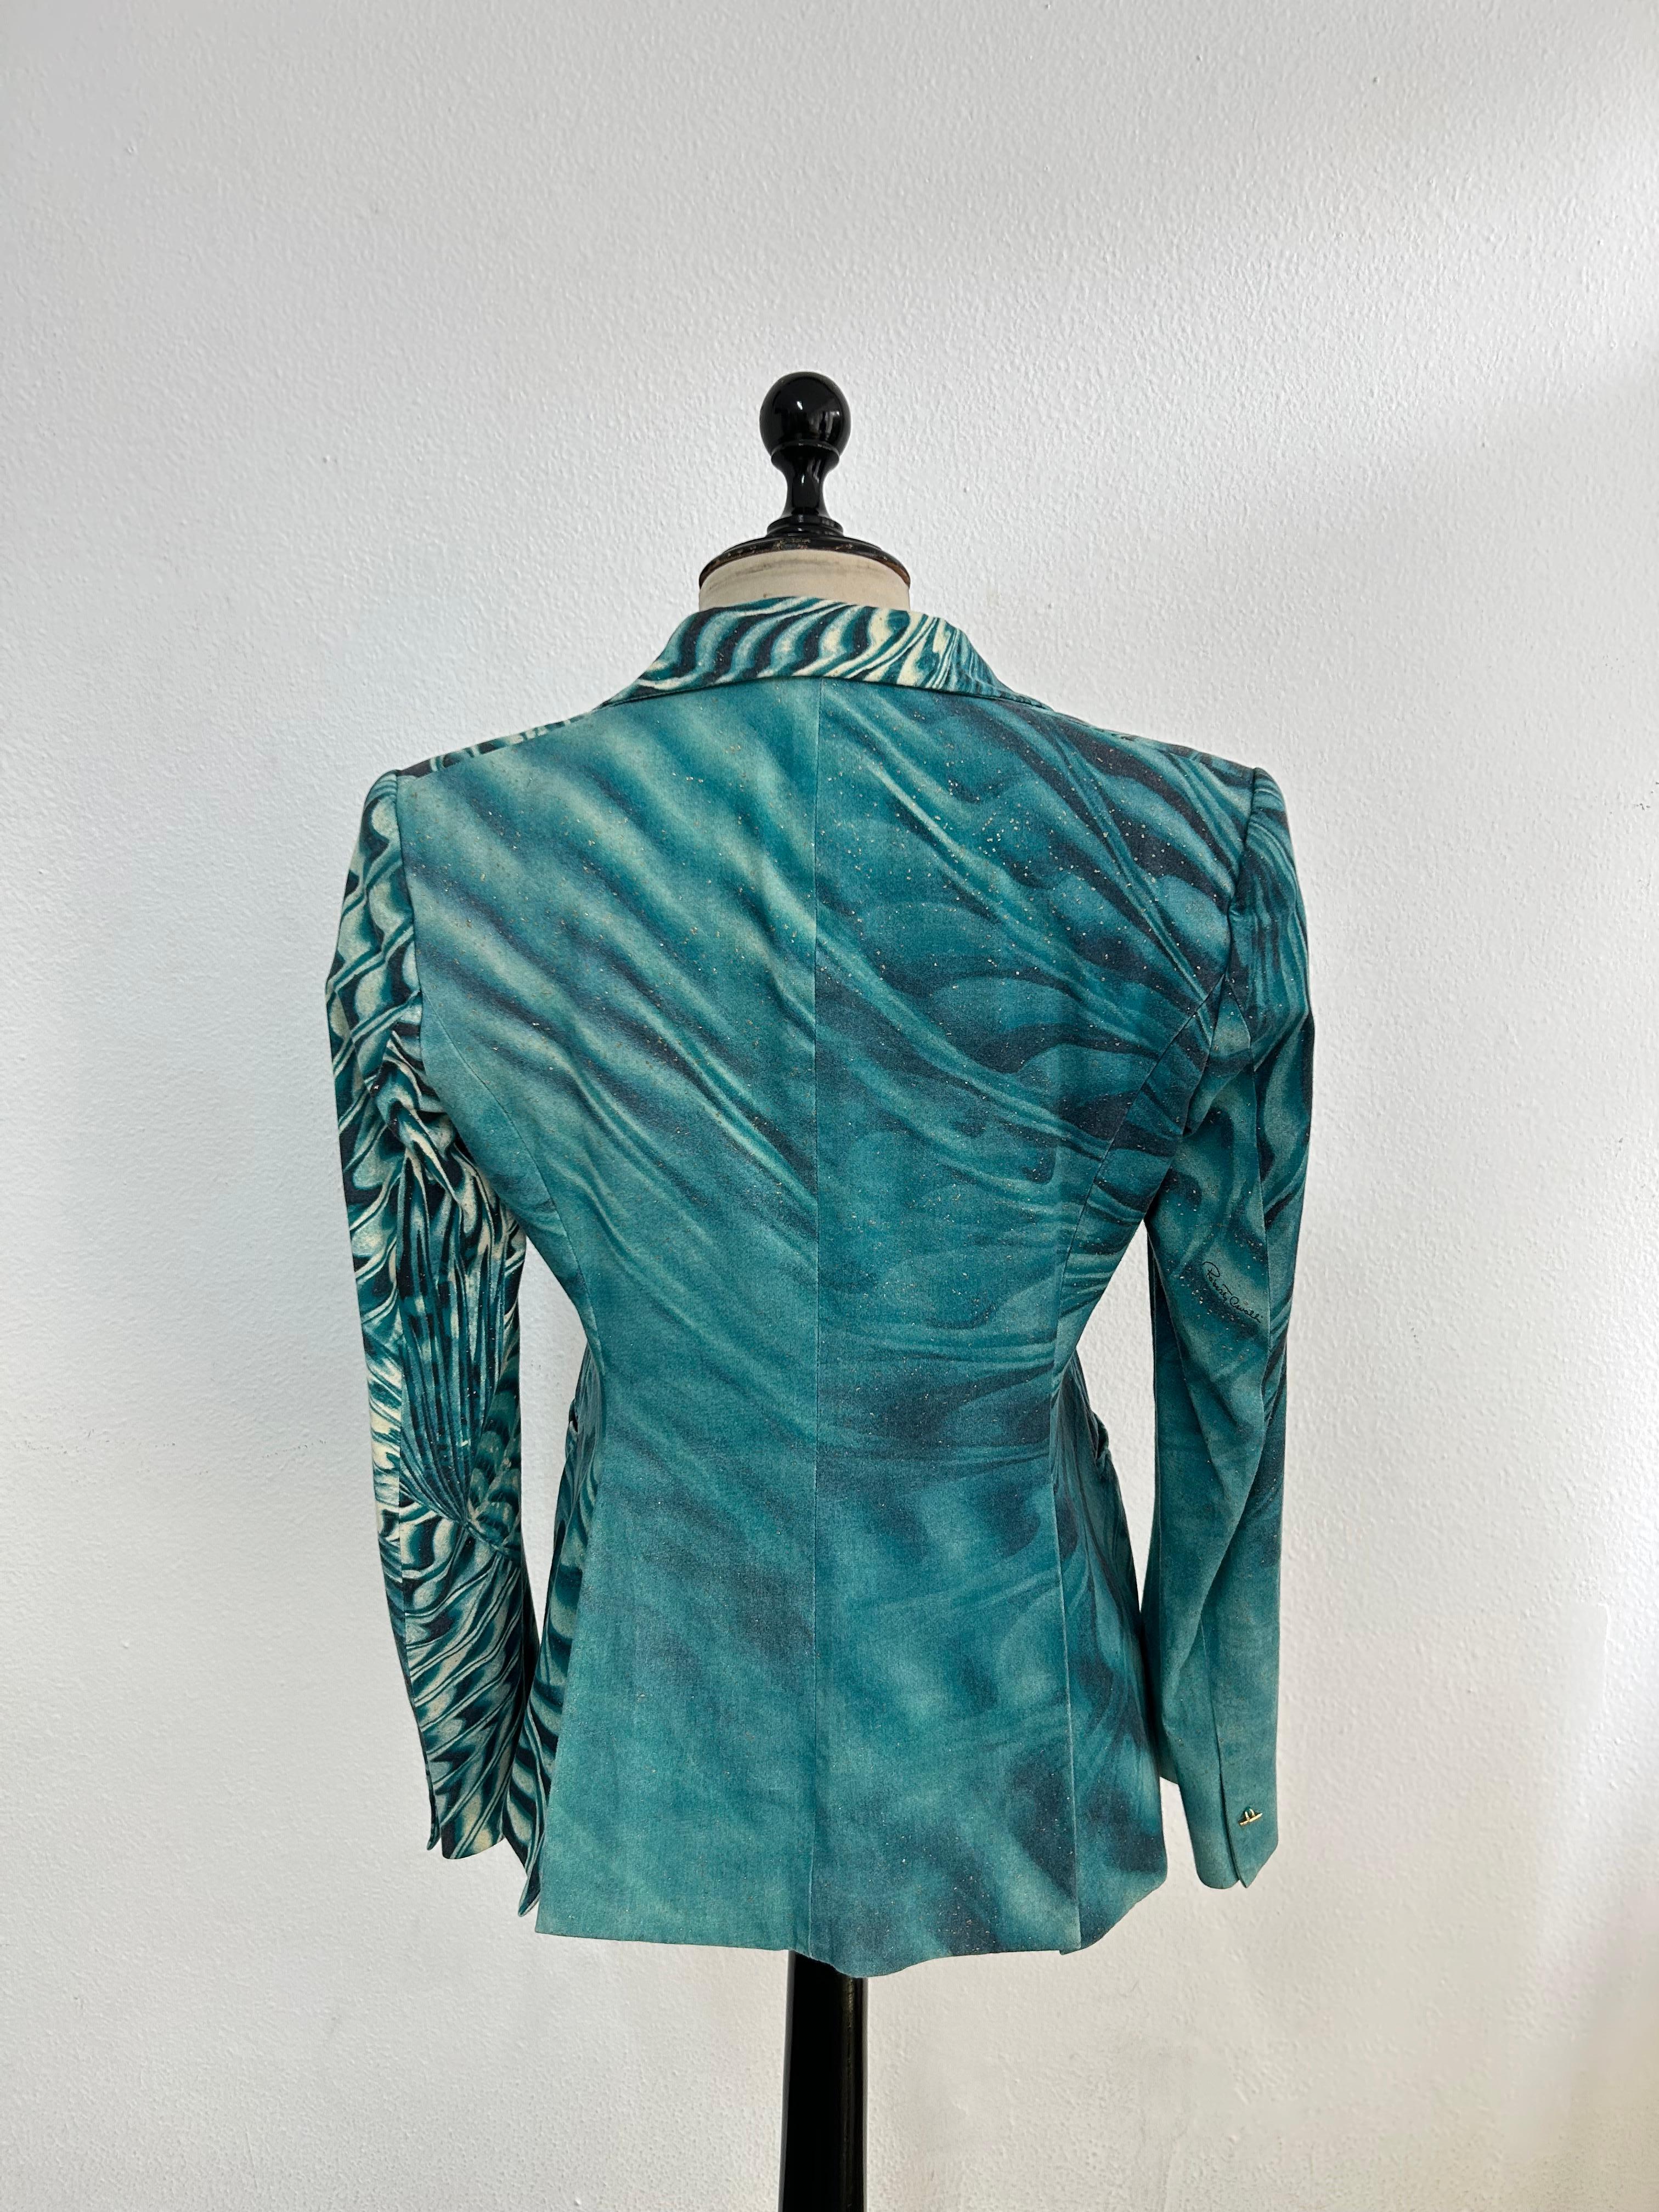 2001 Roberto Cavalli Teal Blue Psychedelic Print Cotton Twill Blazer For Sale 2